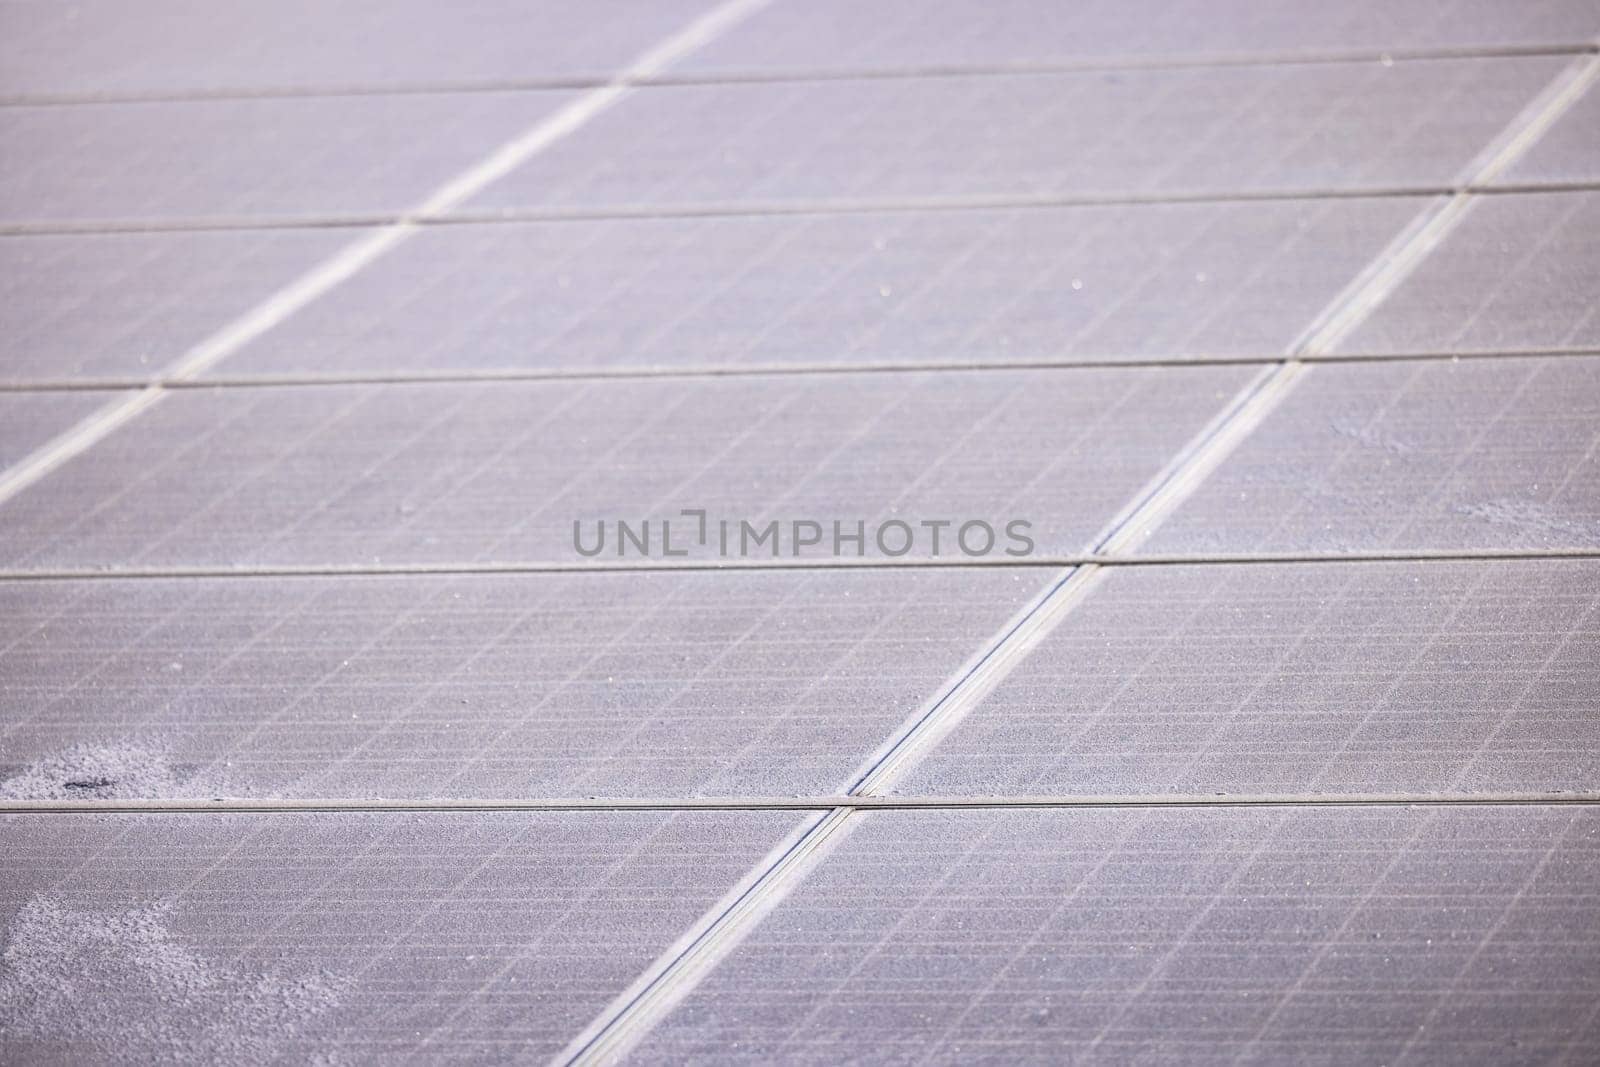 Individual iced solar panels of a PV system for the energy crisis exposed in sunlight in winter